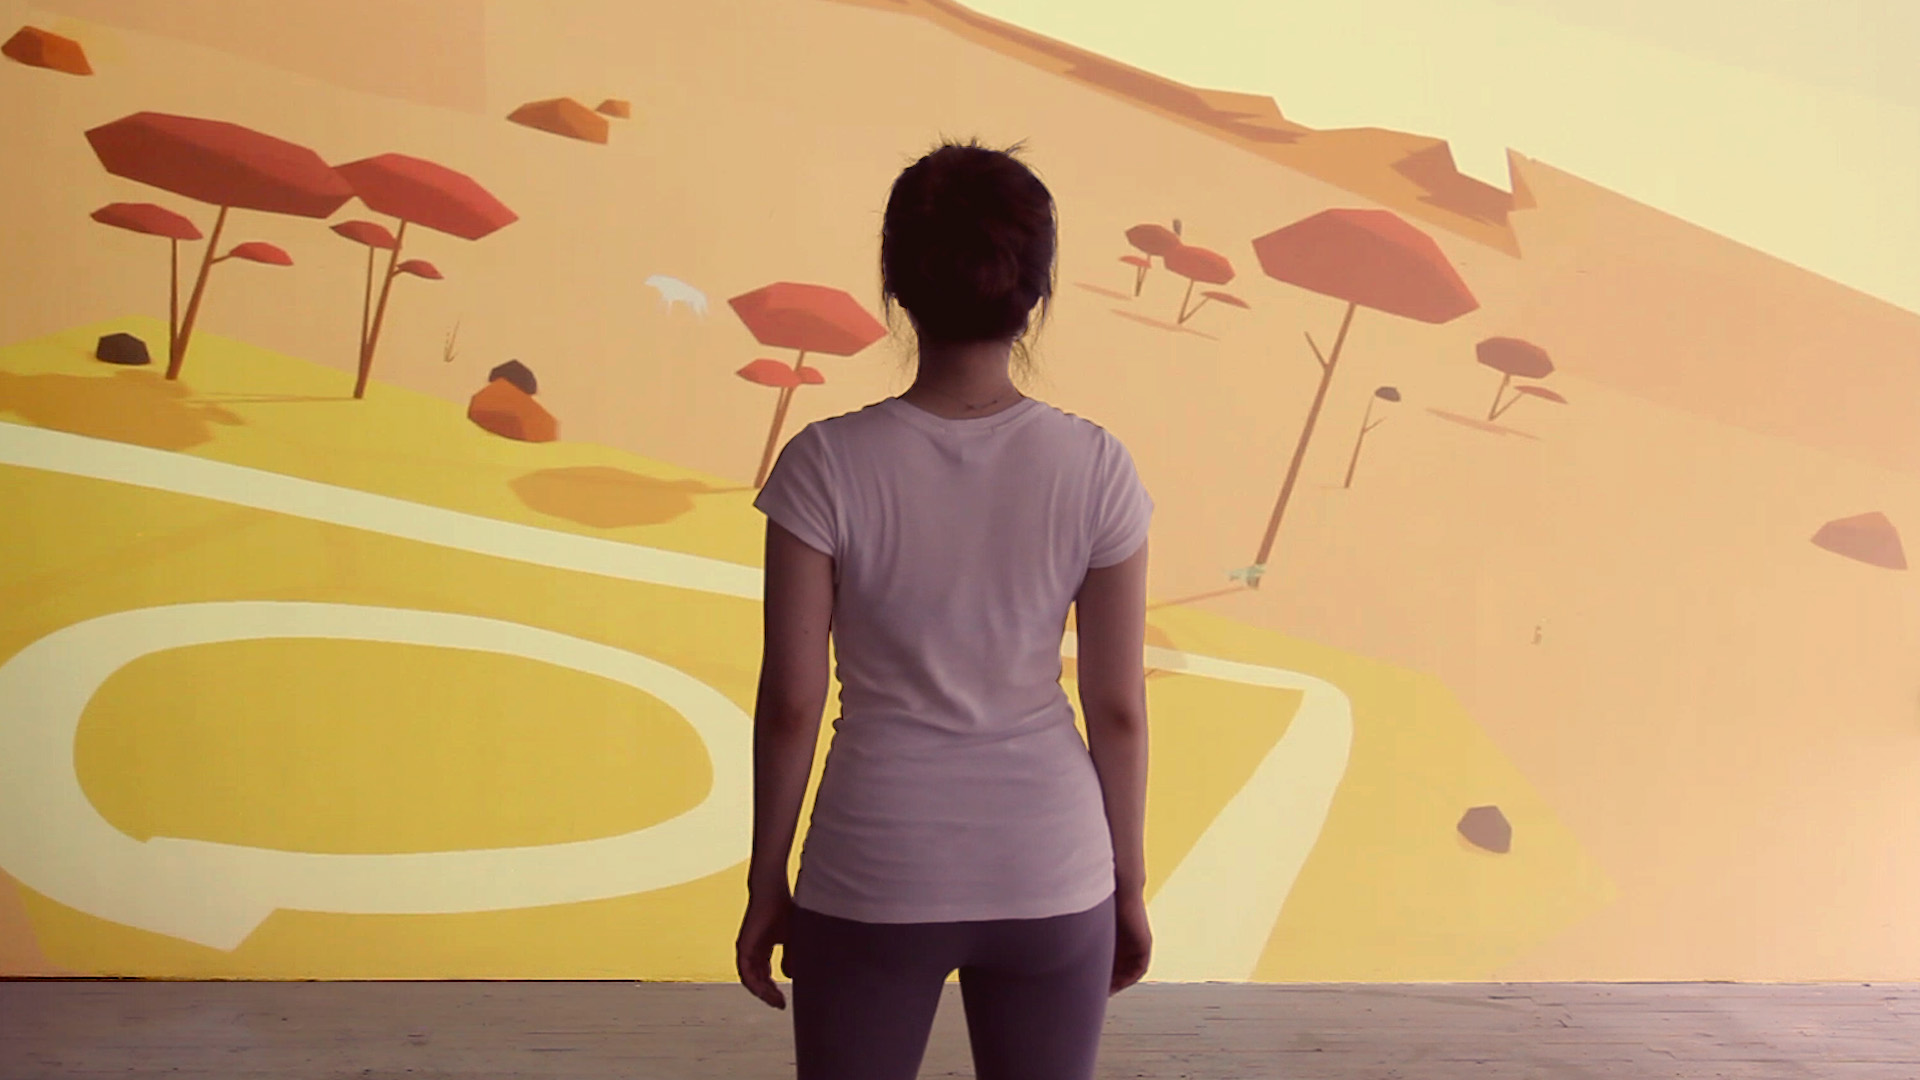 Clif Mantra Maker is an interactive running installation by Red Paper Heart where you can run through a generative landscape based on your drawing.